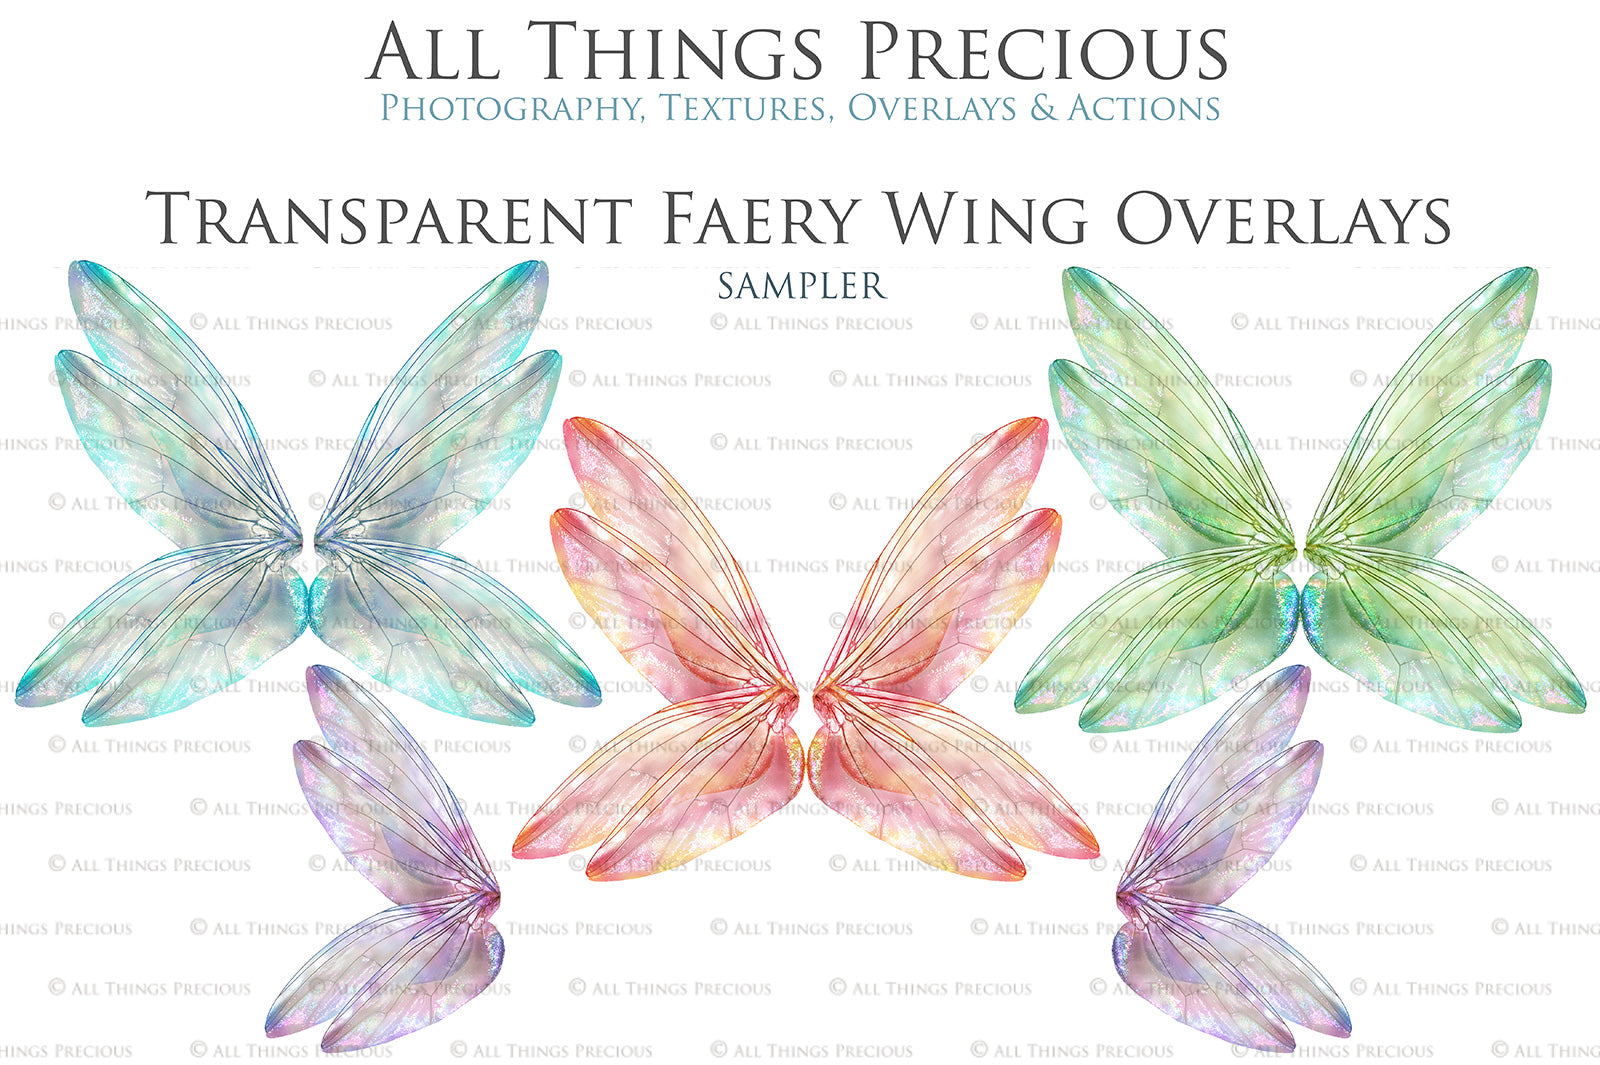 Digital Fairy Wing Overlays clipart. Png transparent see through files for photoshop. Butterfly Angel, Color, Print Photography editing. High resolution, 300dpi. Printable, Photography Graphic design assets, add on stock resources. Magical Scrapbooking design. Fairy Photographer edit. Colorful Big Bundle. ATP Textures.